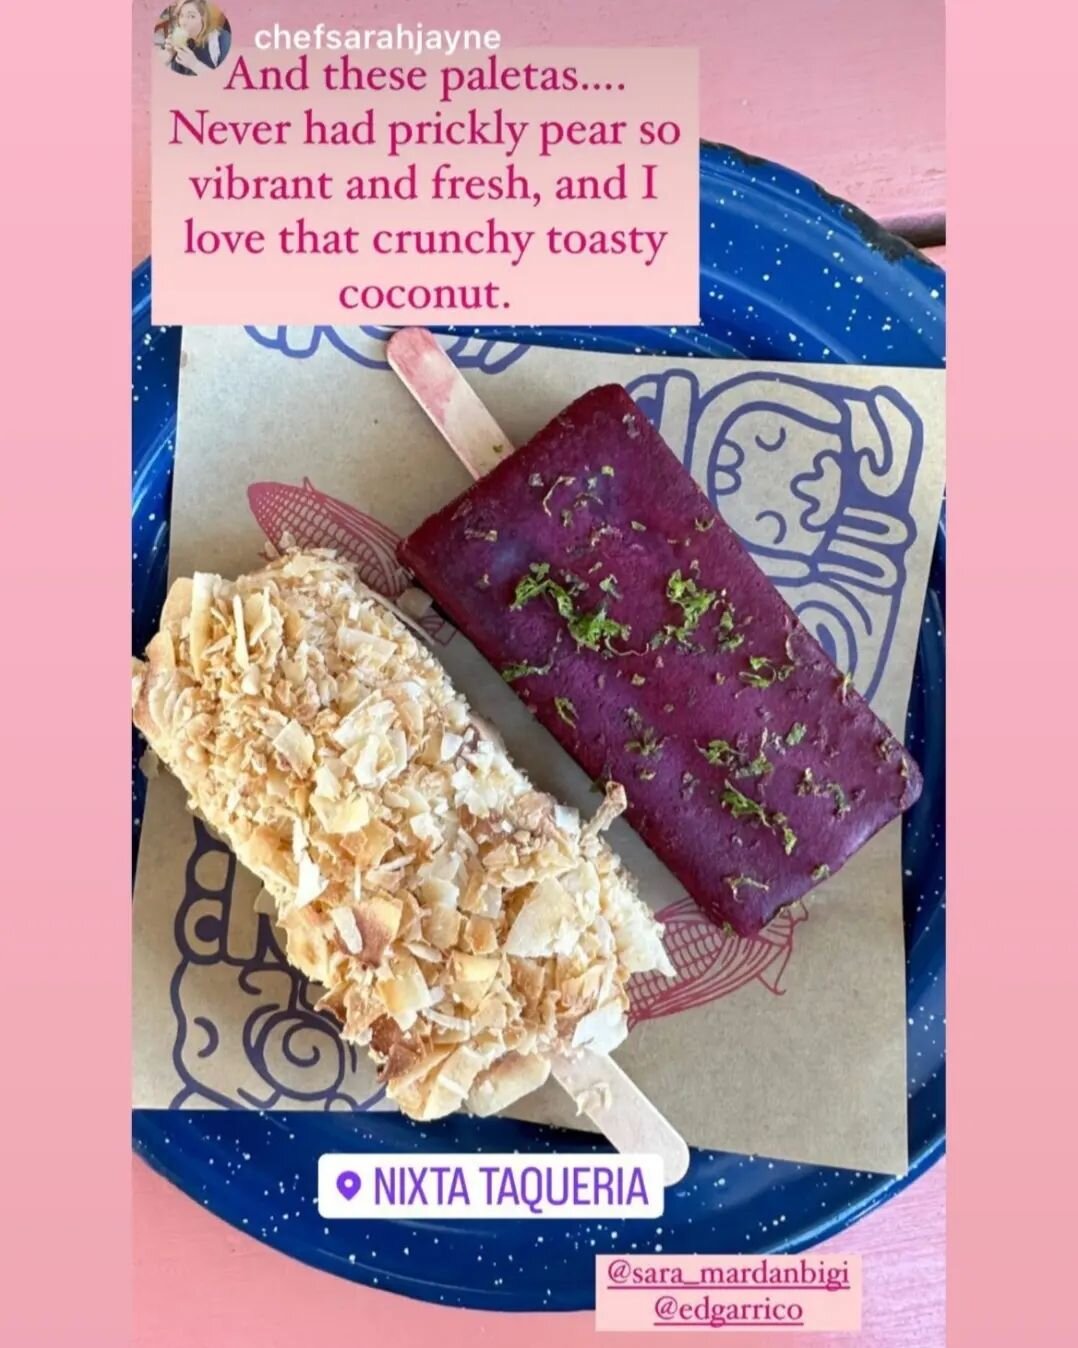 Love hearing good things about our Prickly Pear tunas!  Of course, the paletas are created by @nixtataqueria so we can't take all the credit. ☺️